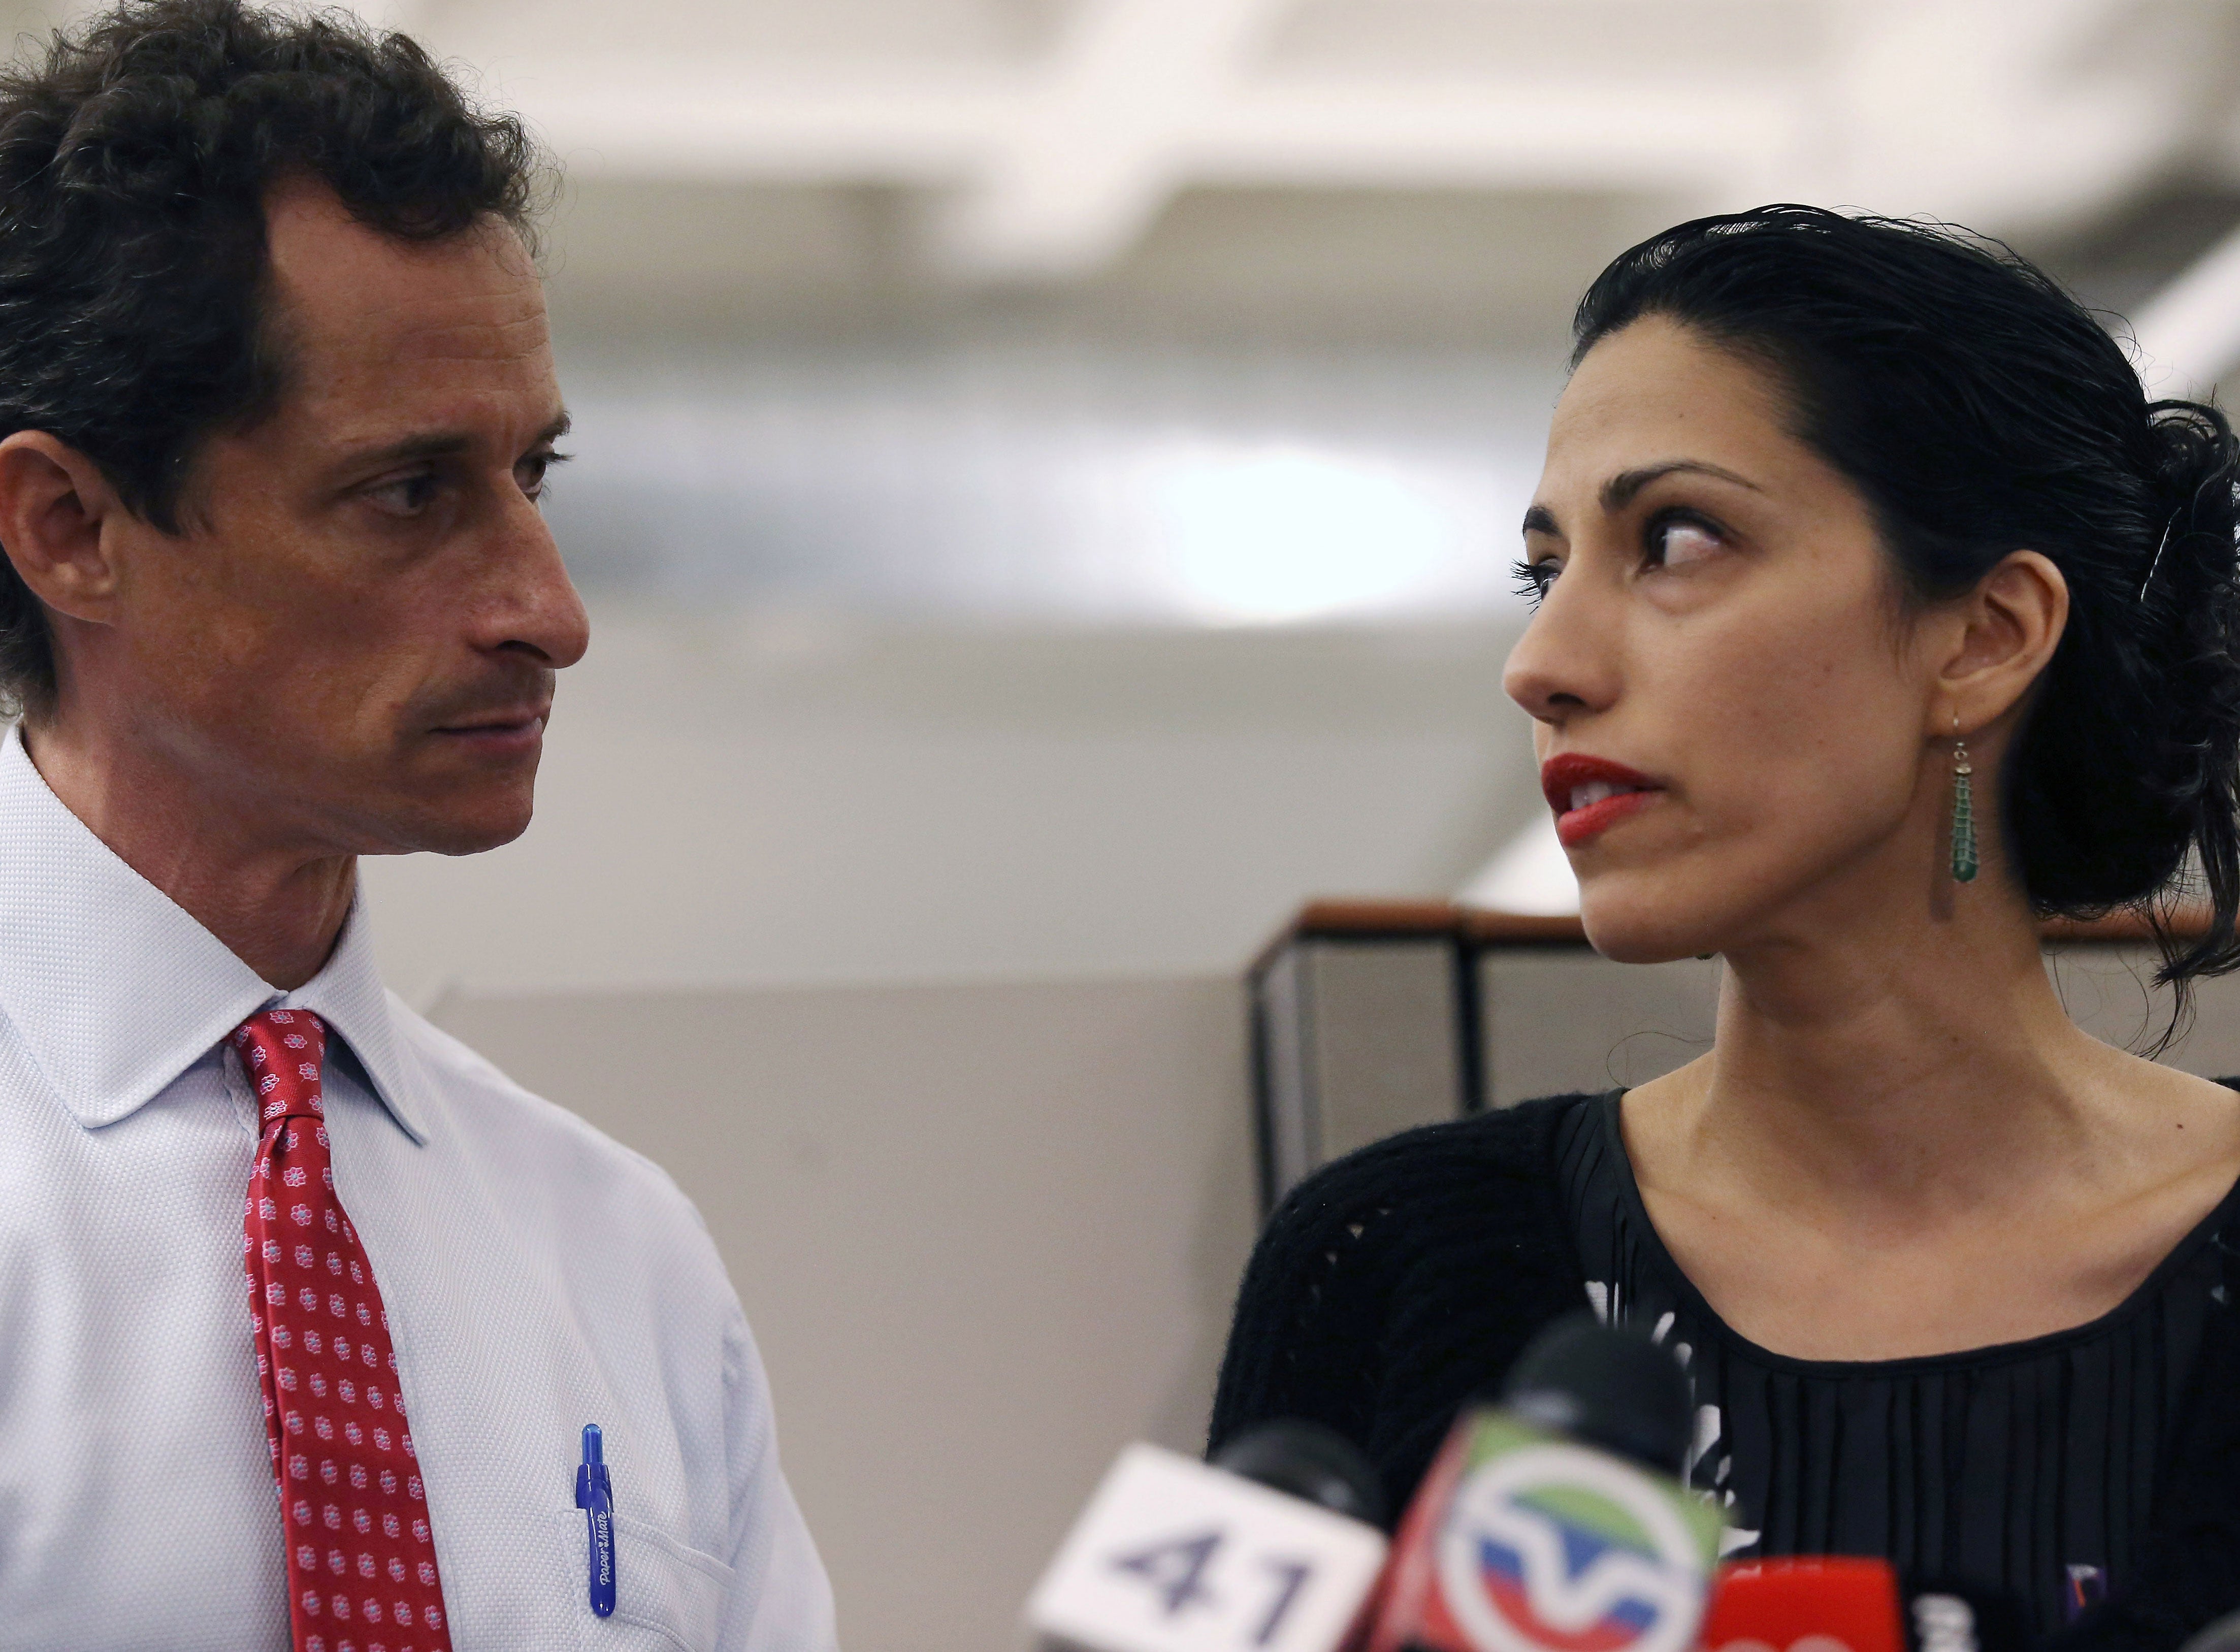 A "Furious and Sickened" Huma Abedin Announces Separation From Anthony Weiner Amid Sexting Scandal
